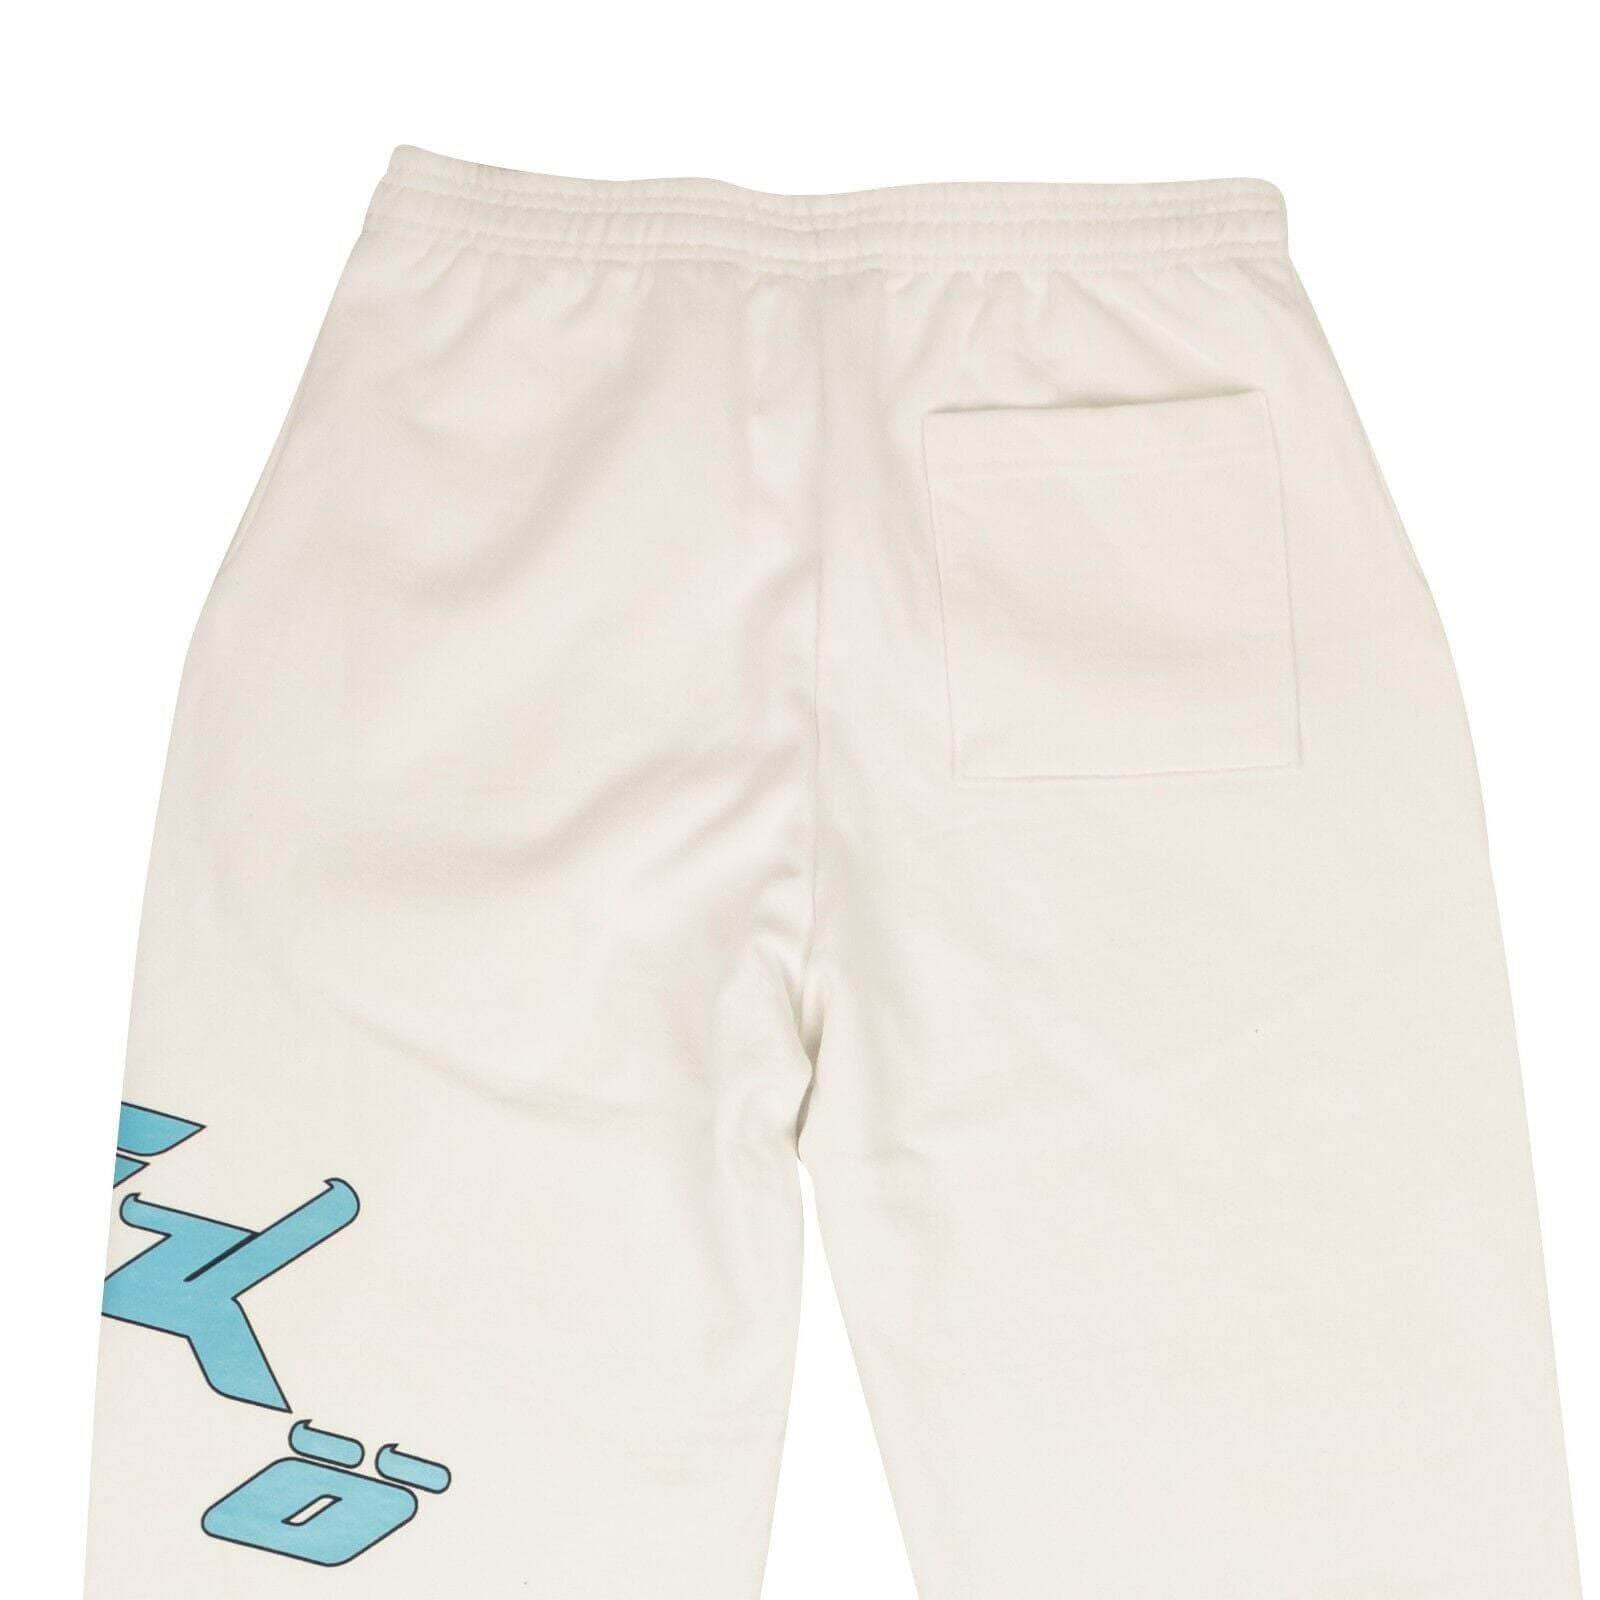 Sicko x 375 channelenable-all, chicmi, couponcollection, gender-mens, main-clothing, mens-joggers-sweatpants, mens-shoes, sicko-x-375, size-l, size-m, size-s, size-xl, under-250 White Cotton Light Blue Logo Print Sweatpants